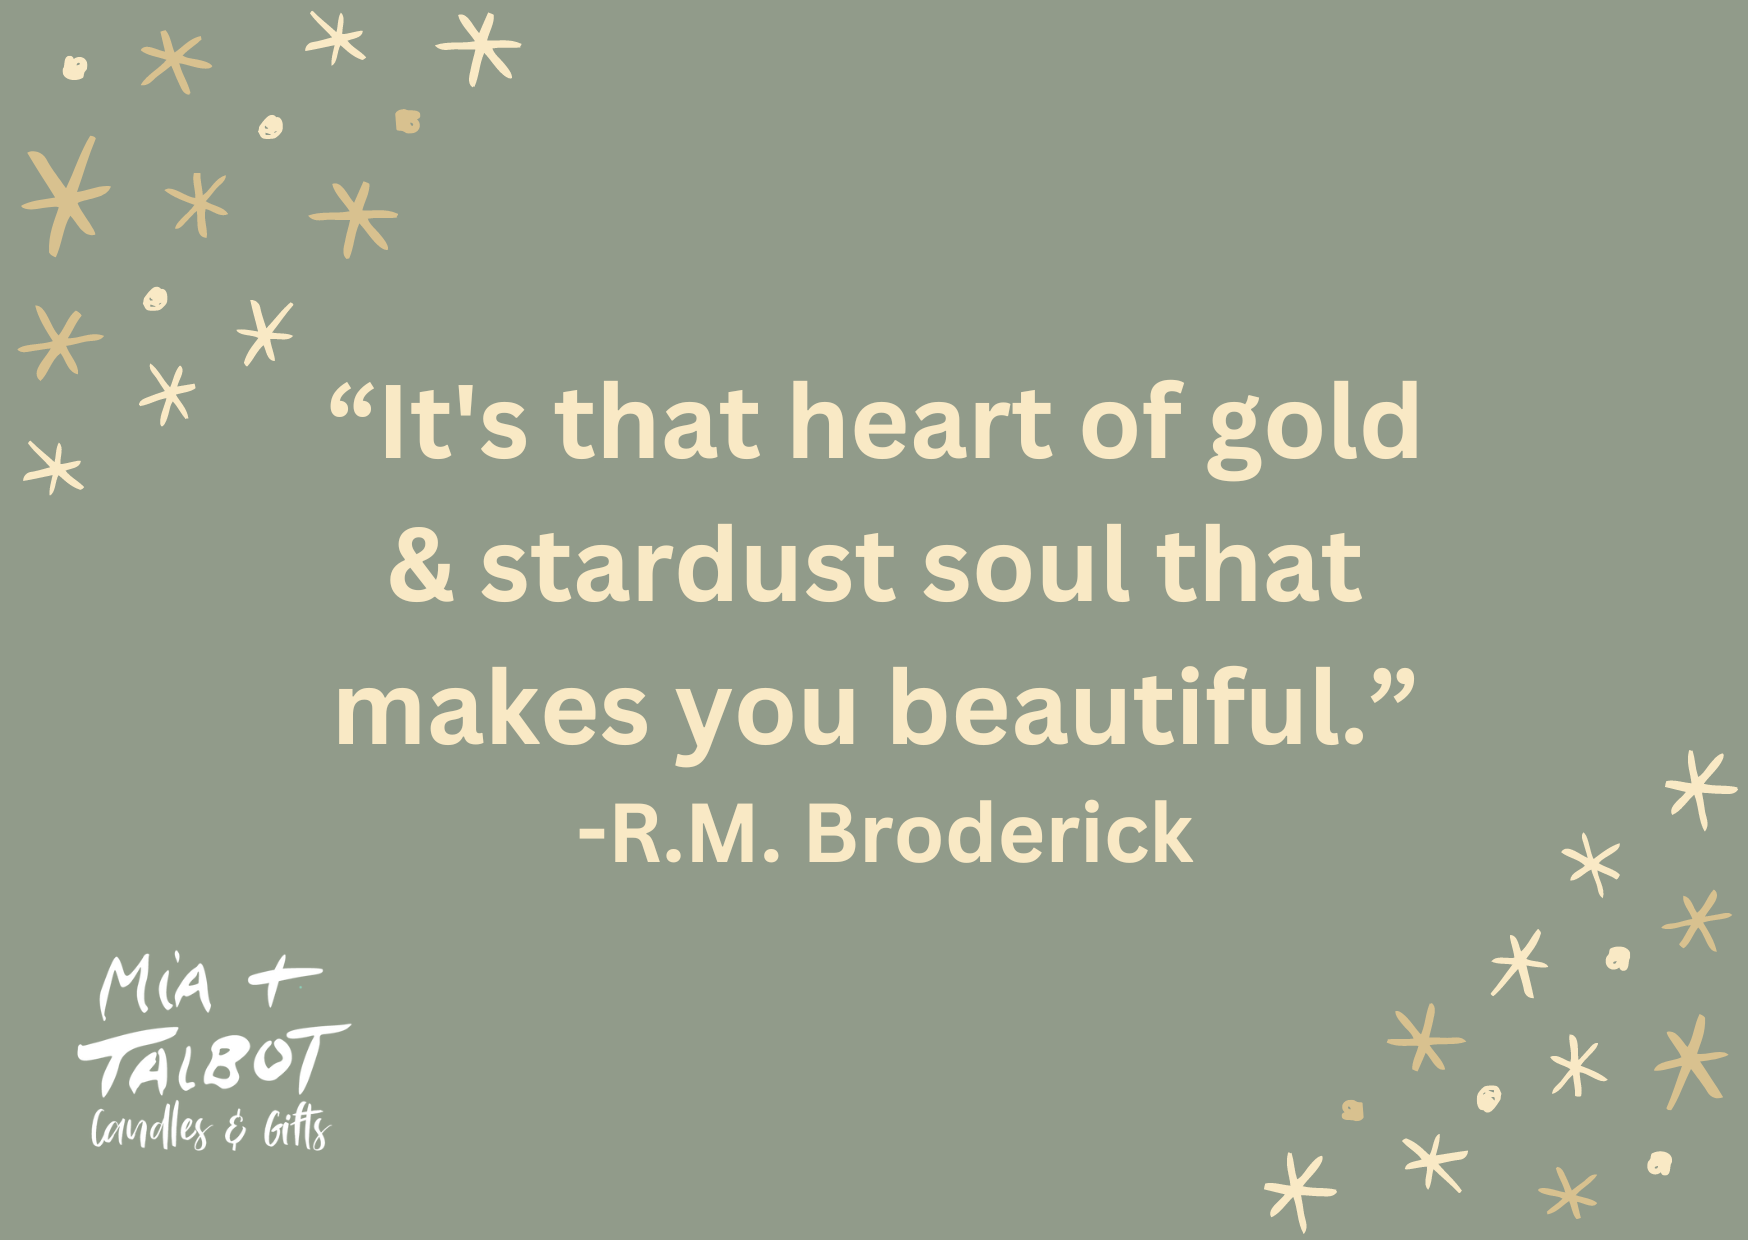 It's that heart of gold & stardust soul that makes you beautiful $0.00